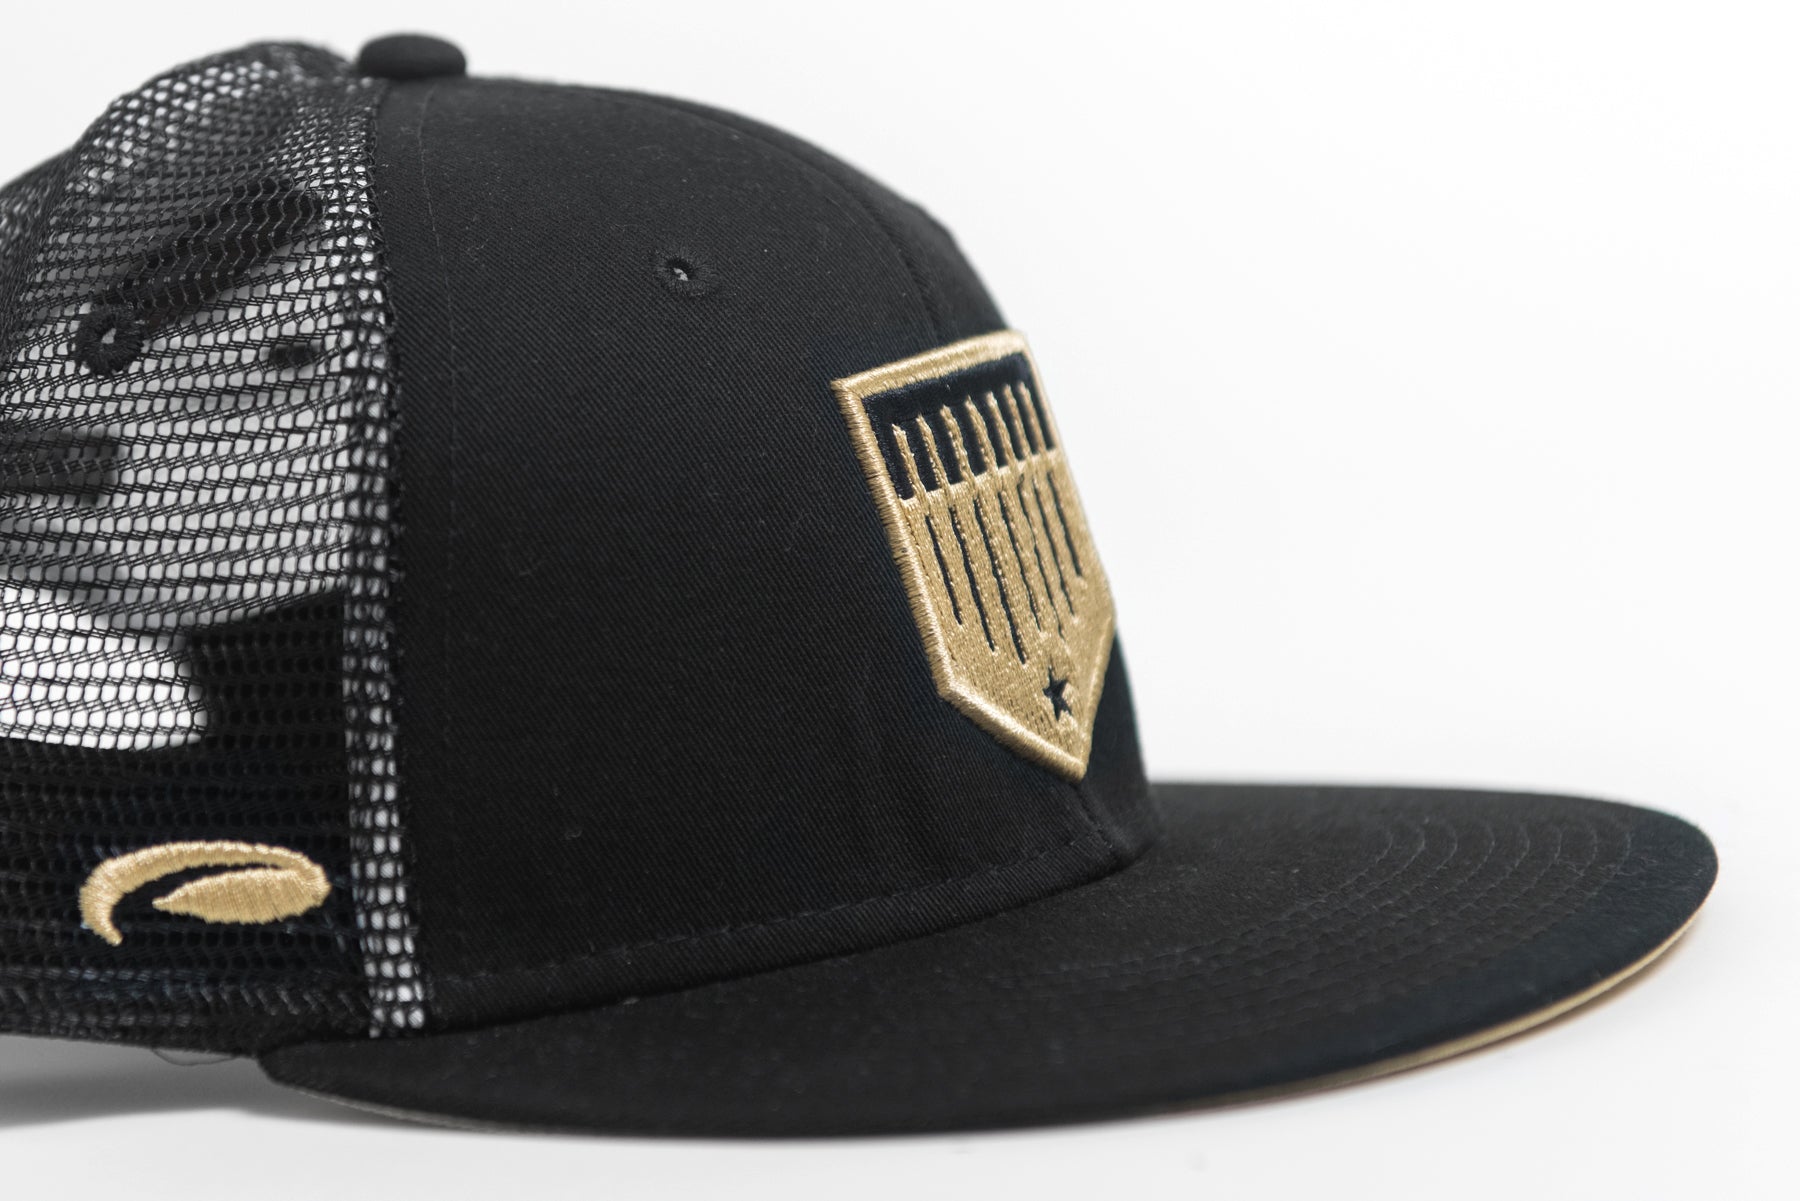 black and gold mesh trucker hat image 2